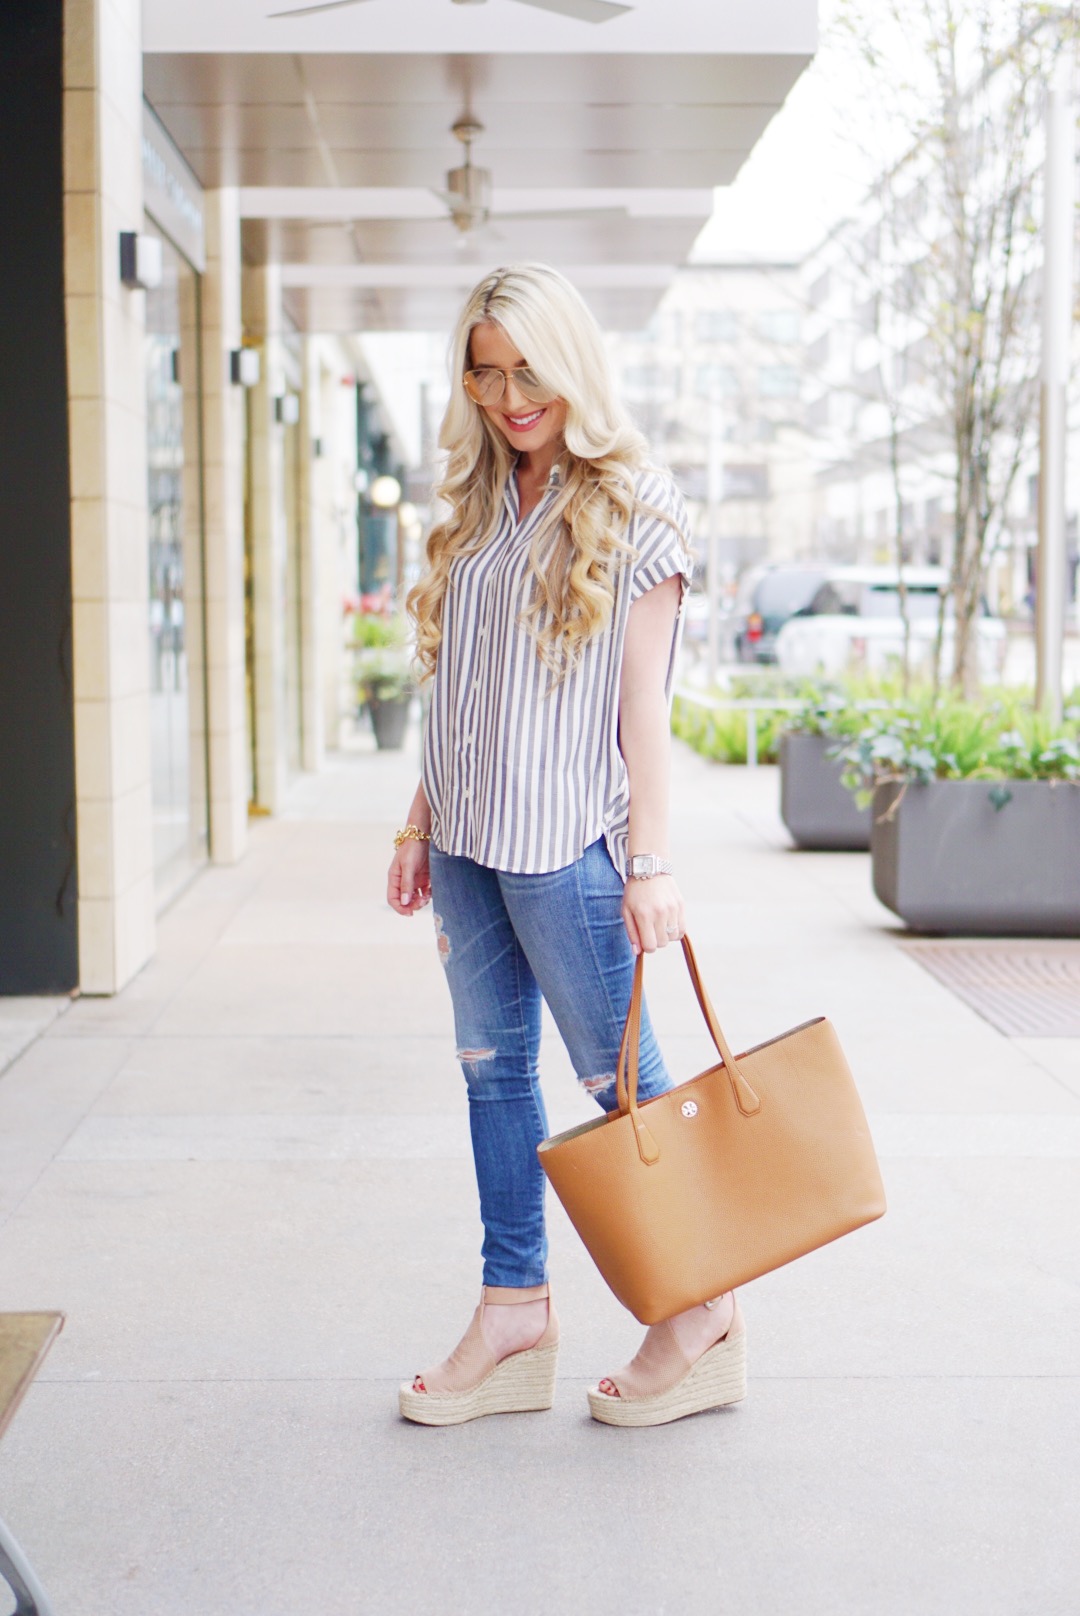 A Touch Of Pink Blog Katelyn Jones Fashion Blogger Cute Outfit Nordstrom Clothes 